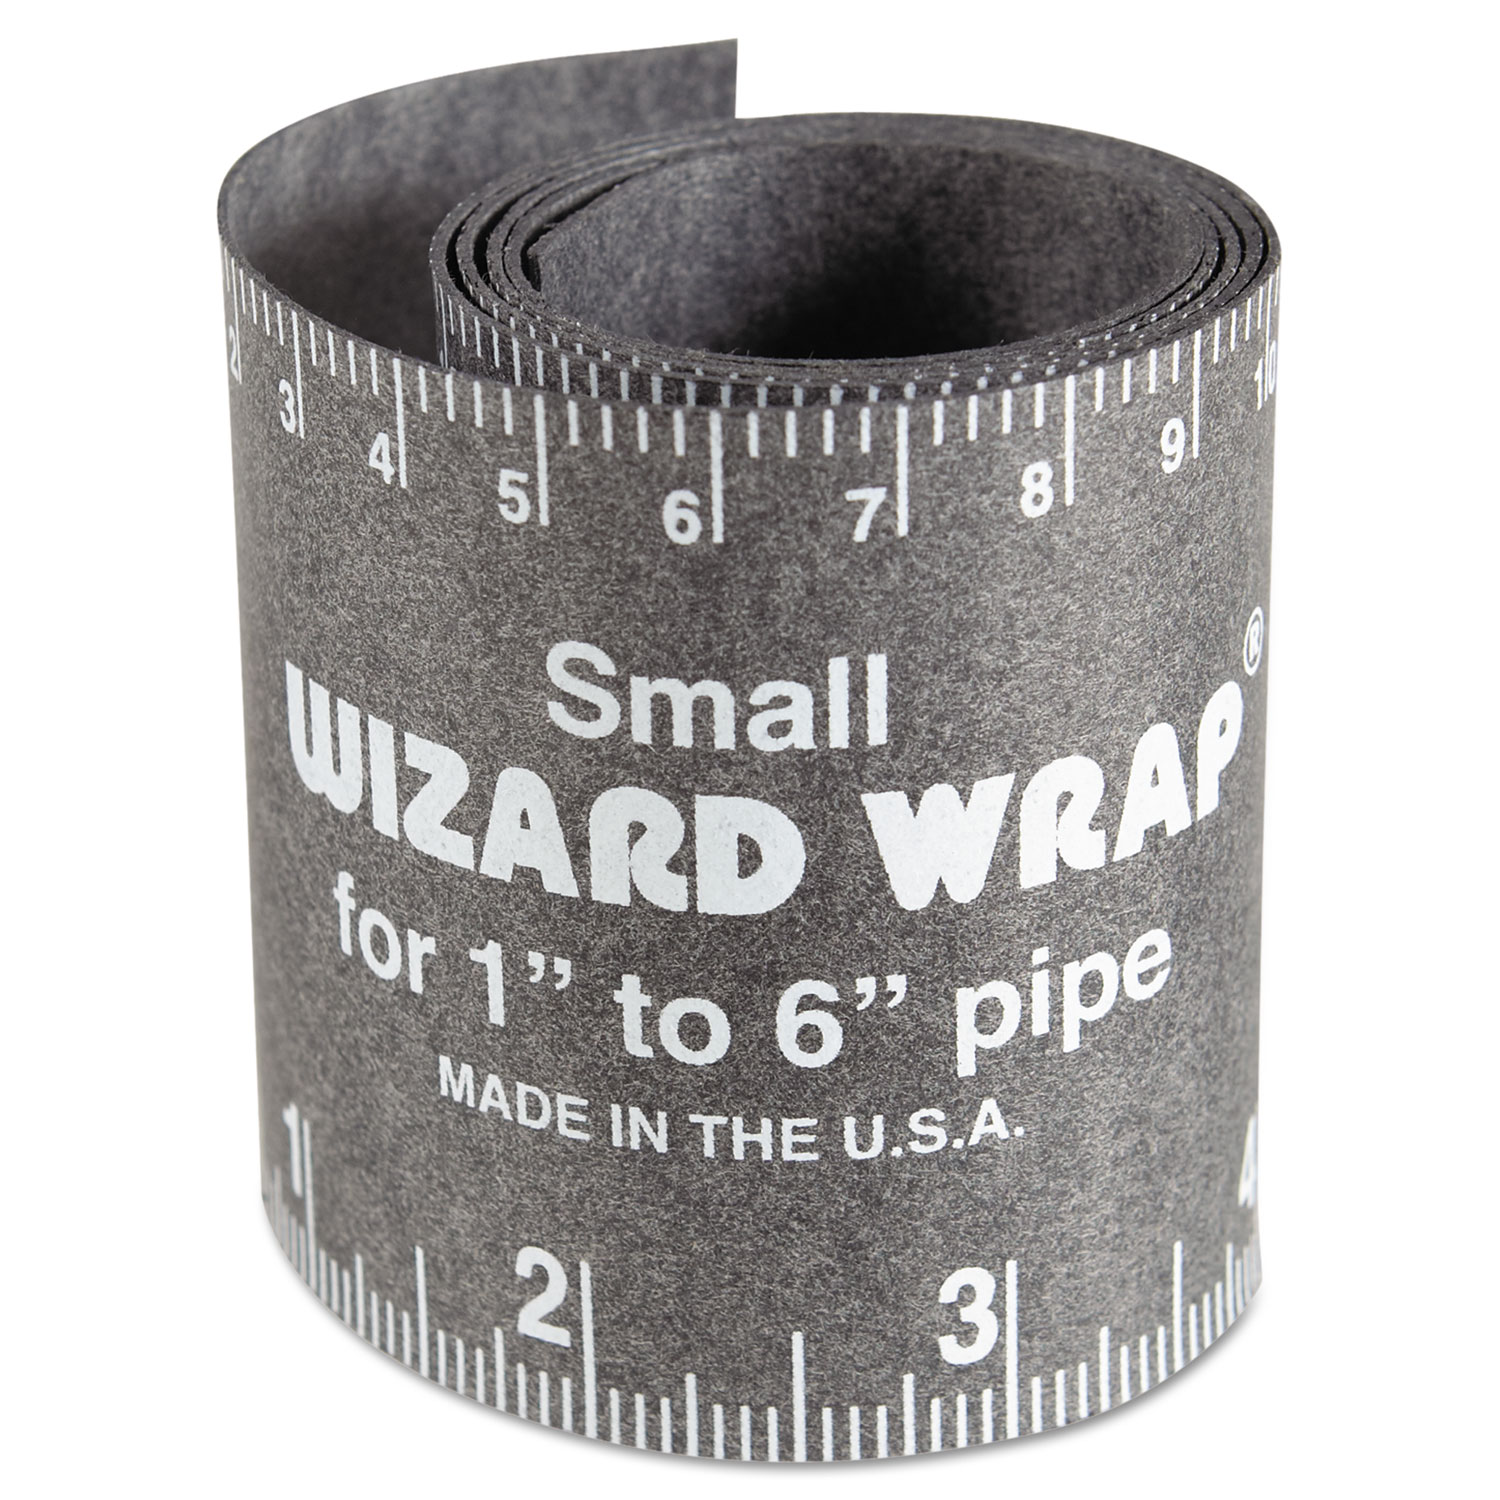 Wizard Wrap, Small, 1 to 6 Pipe